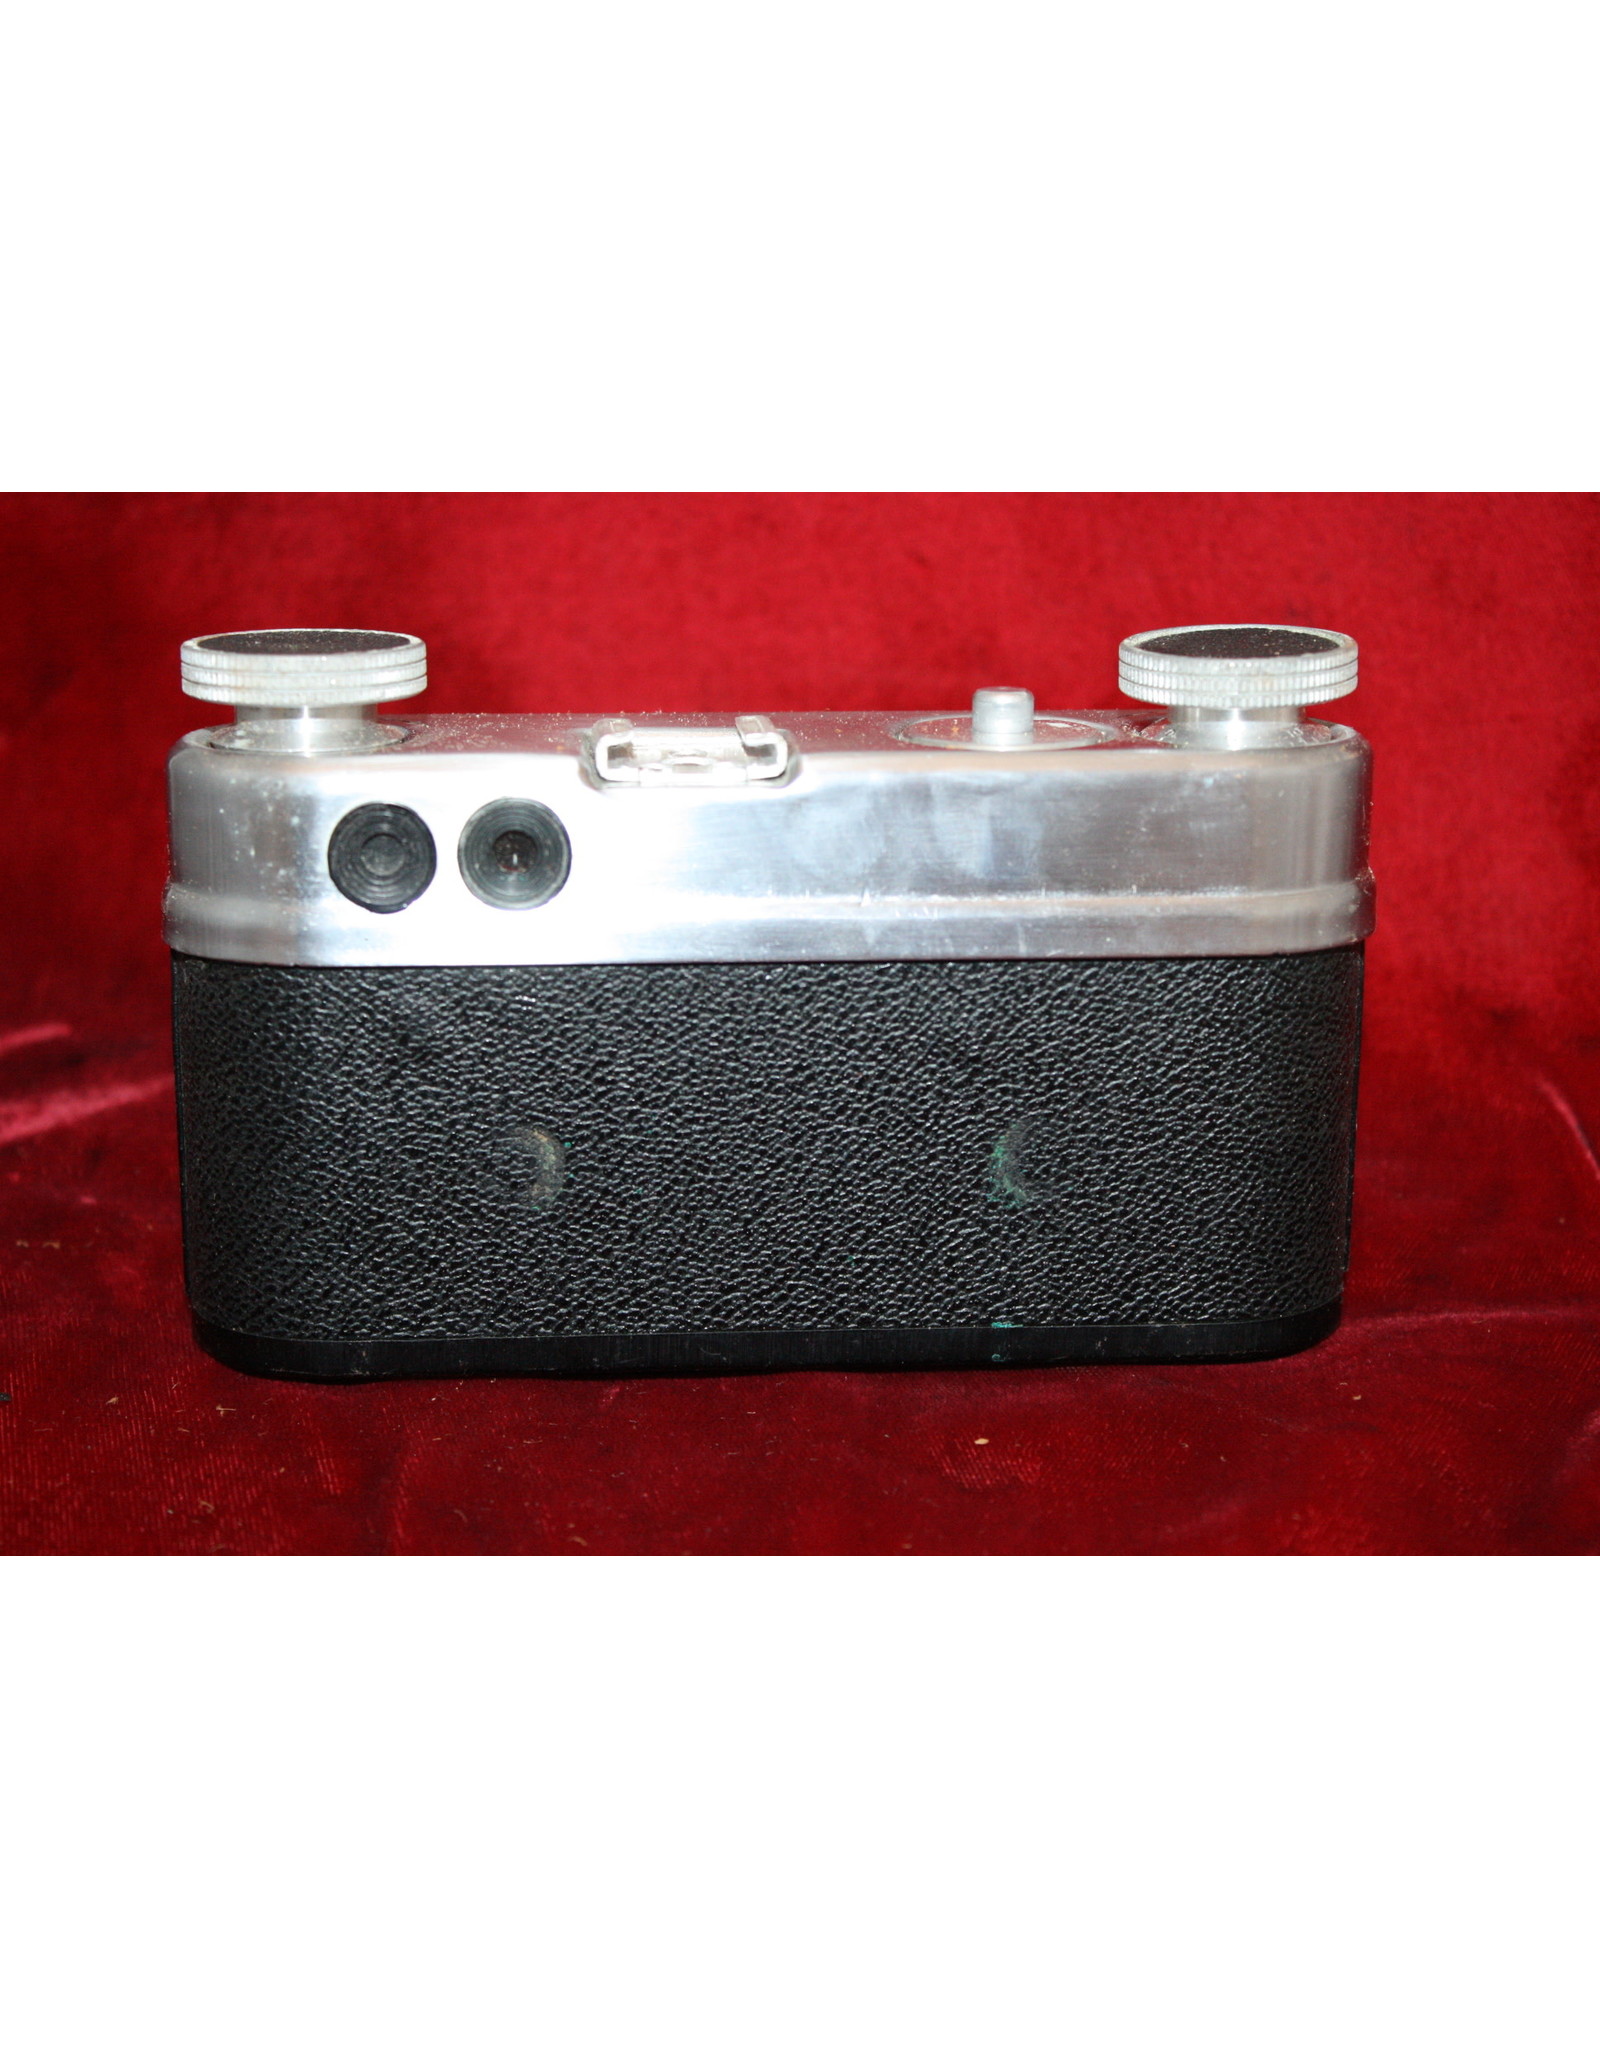 Candid Camera Corporation Perfex one-o-two Rangefinder Wollensak 50mm 4.5 Lens